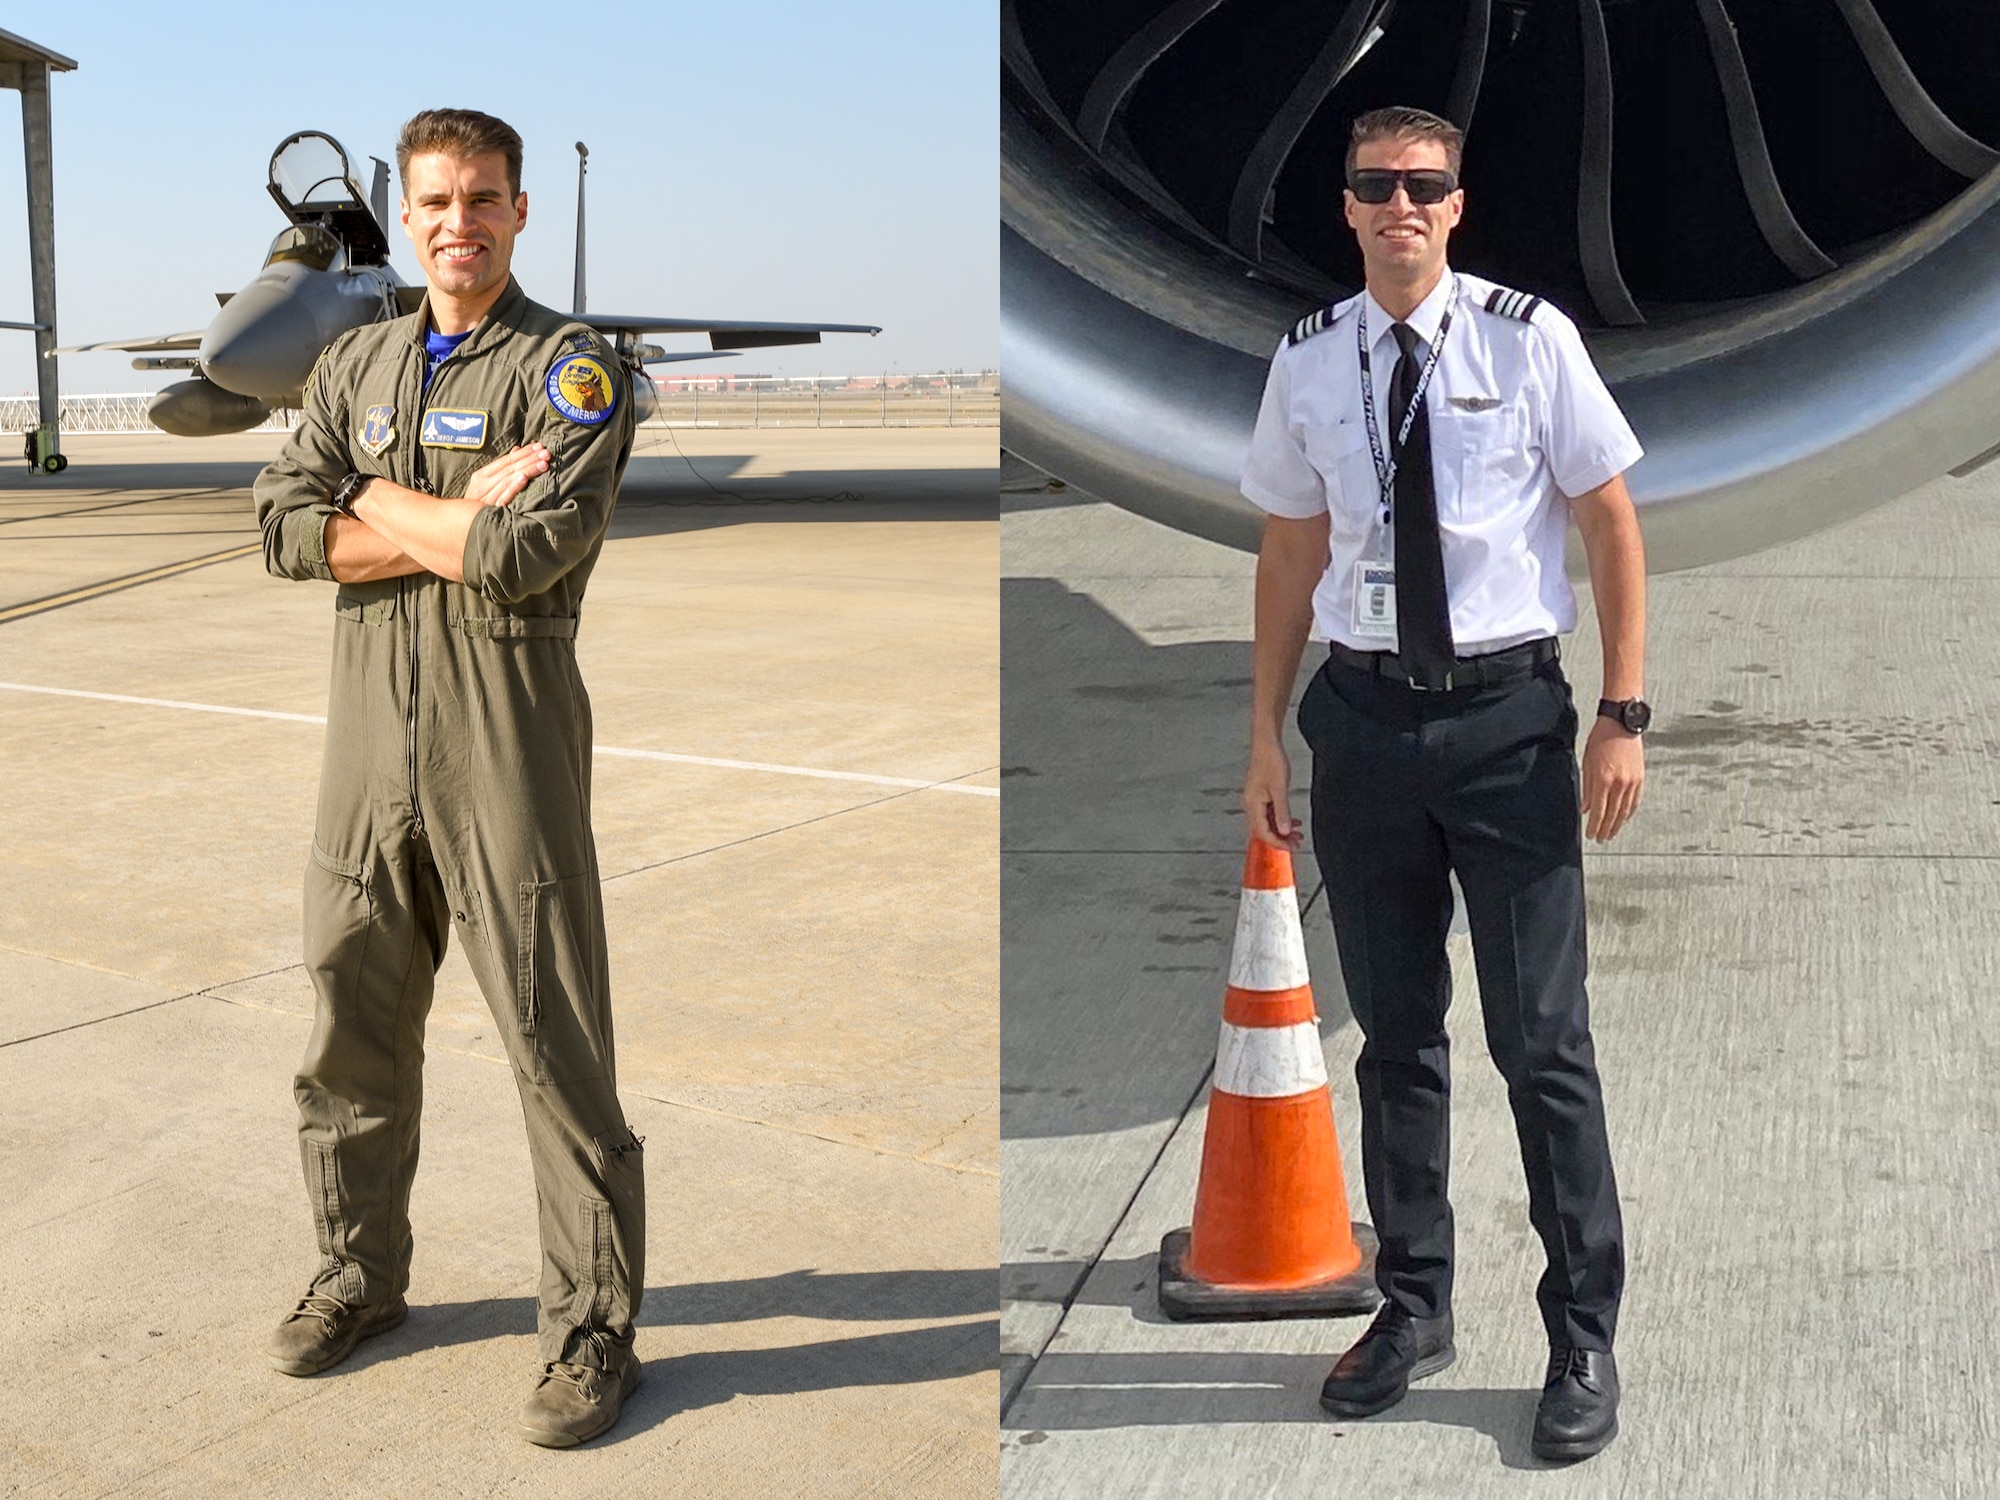 Capt. Charles “Depot" Jamieson is an F-15C Eagle pilot at the 144th Fighter Wing and flies commercially for Federal Express. (Photo collage created July 2023 by Capt. Jason Sanchez)